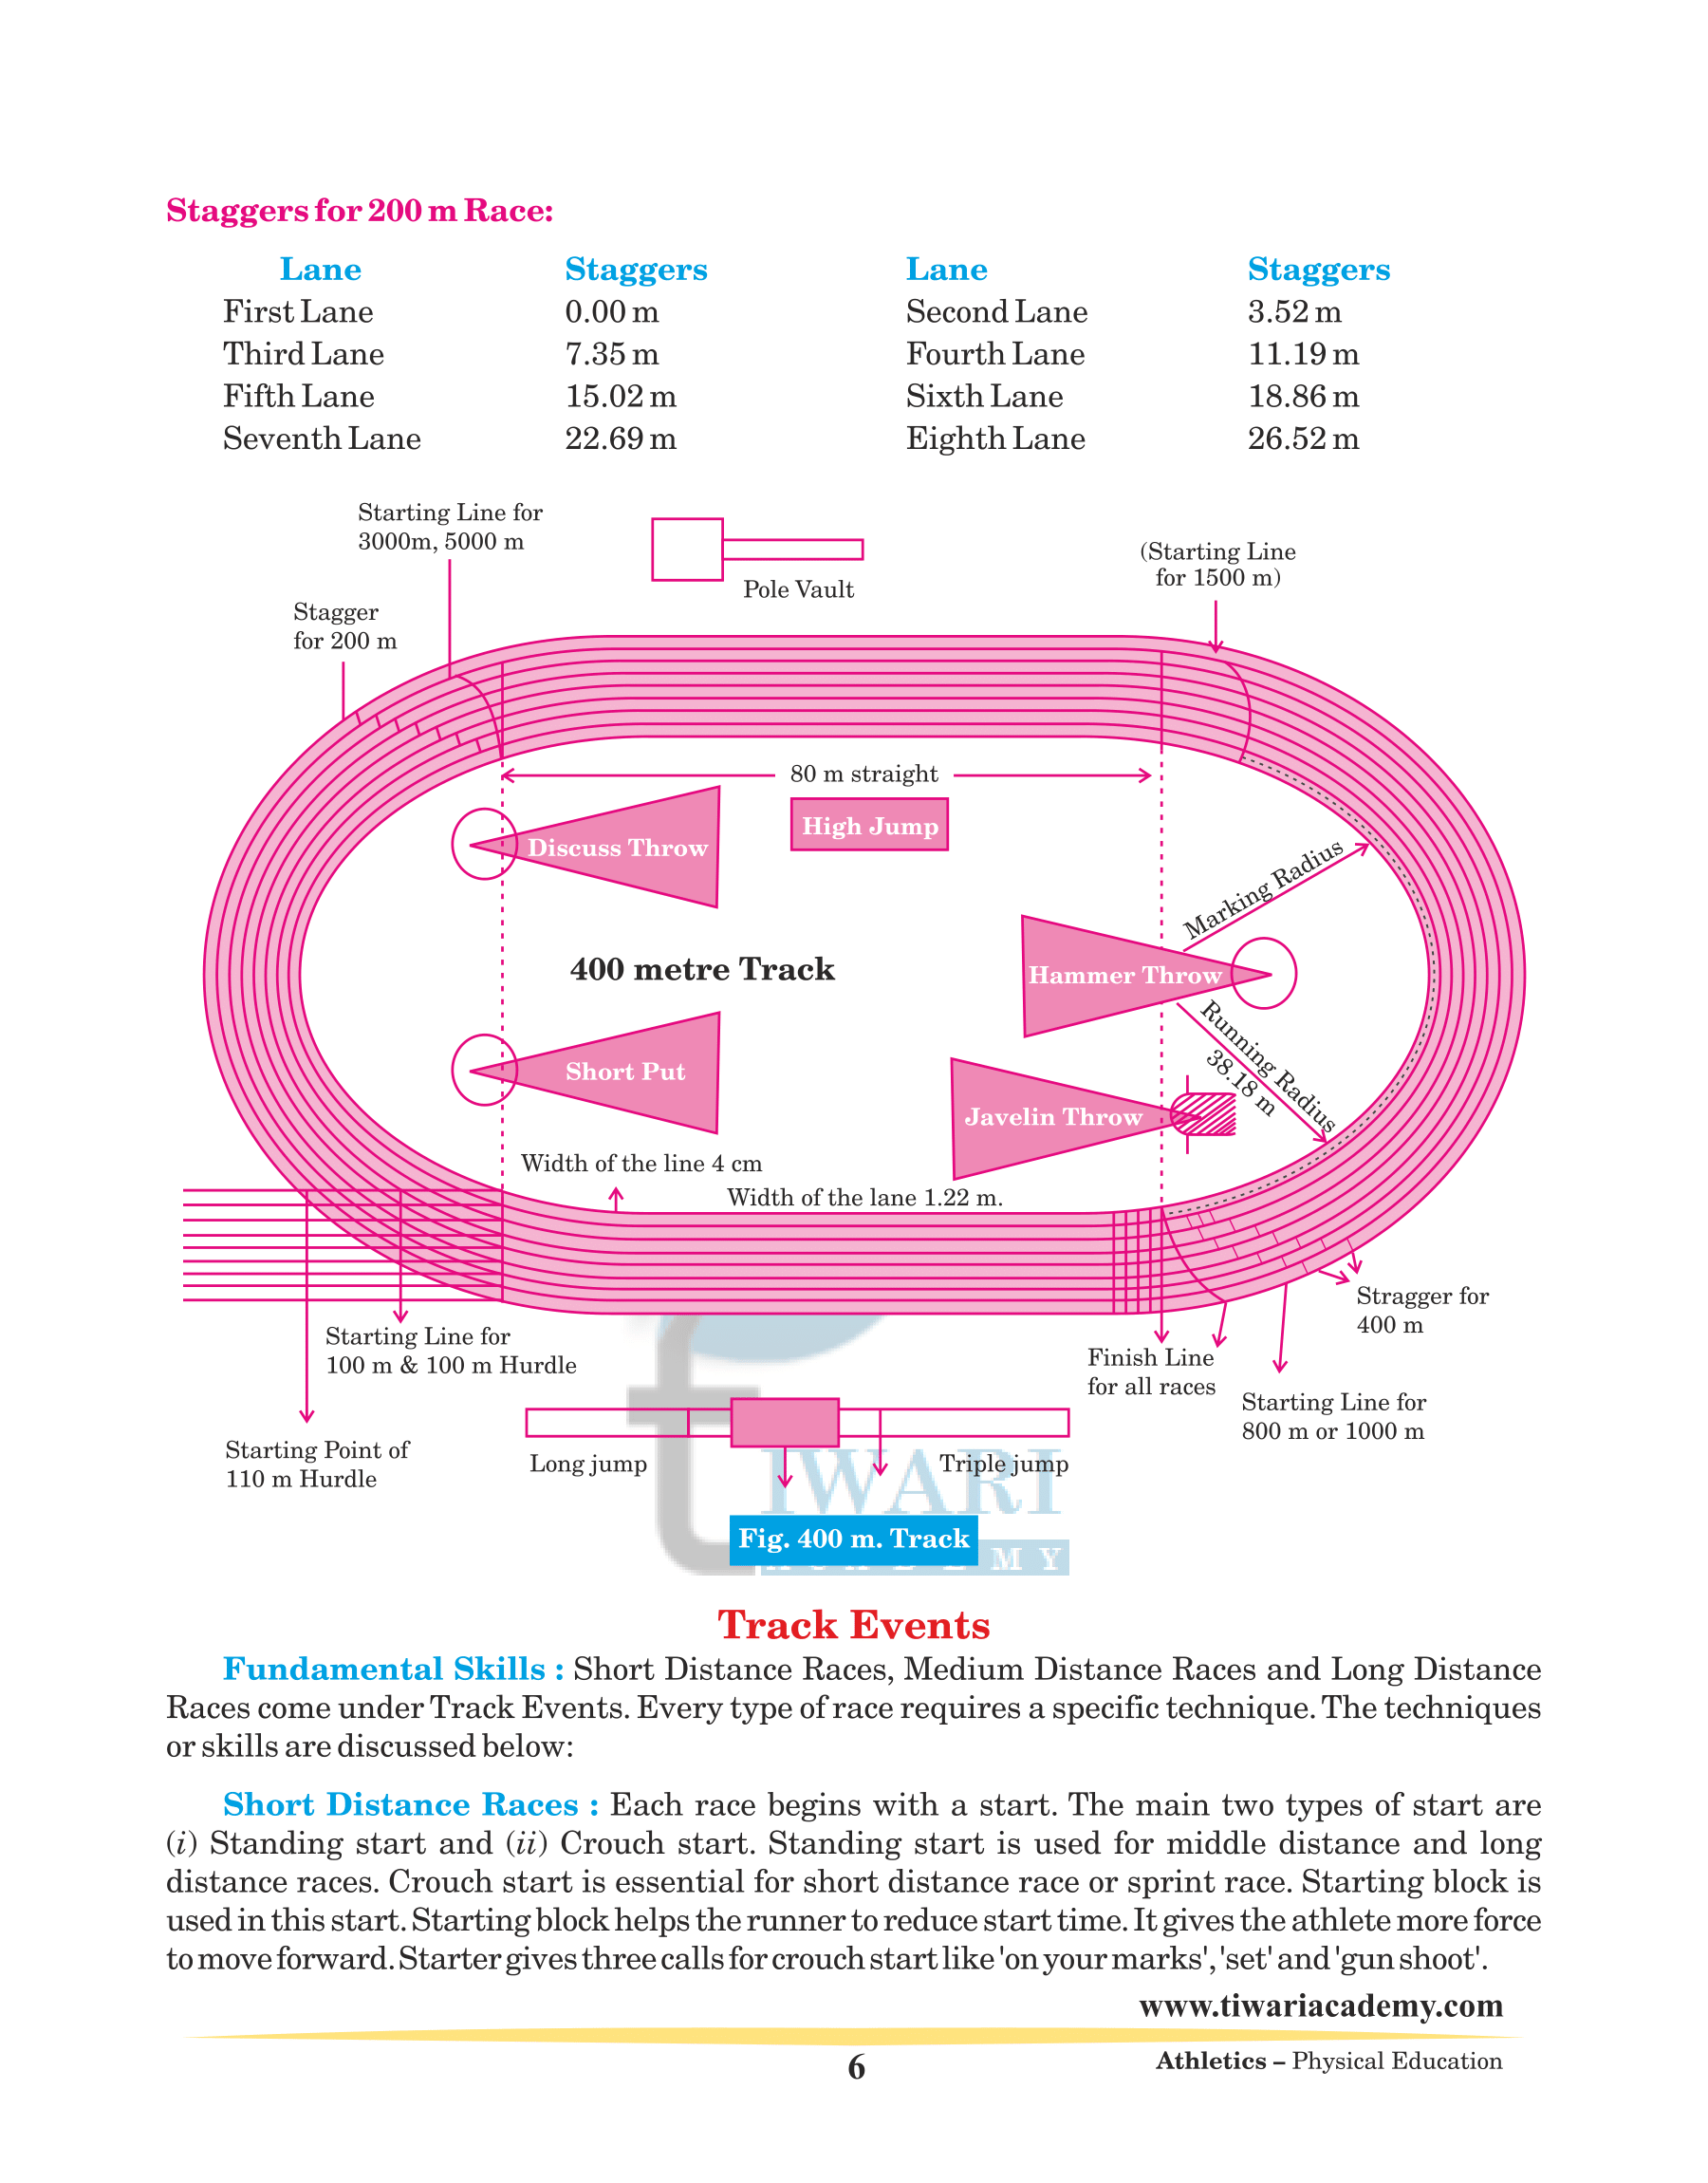 Measurements of different events in Athletics